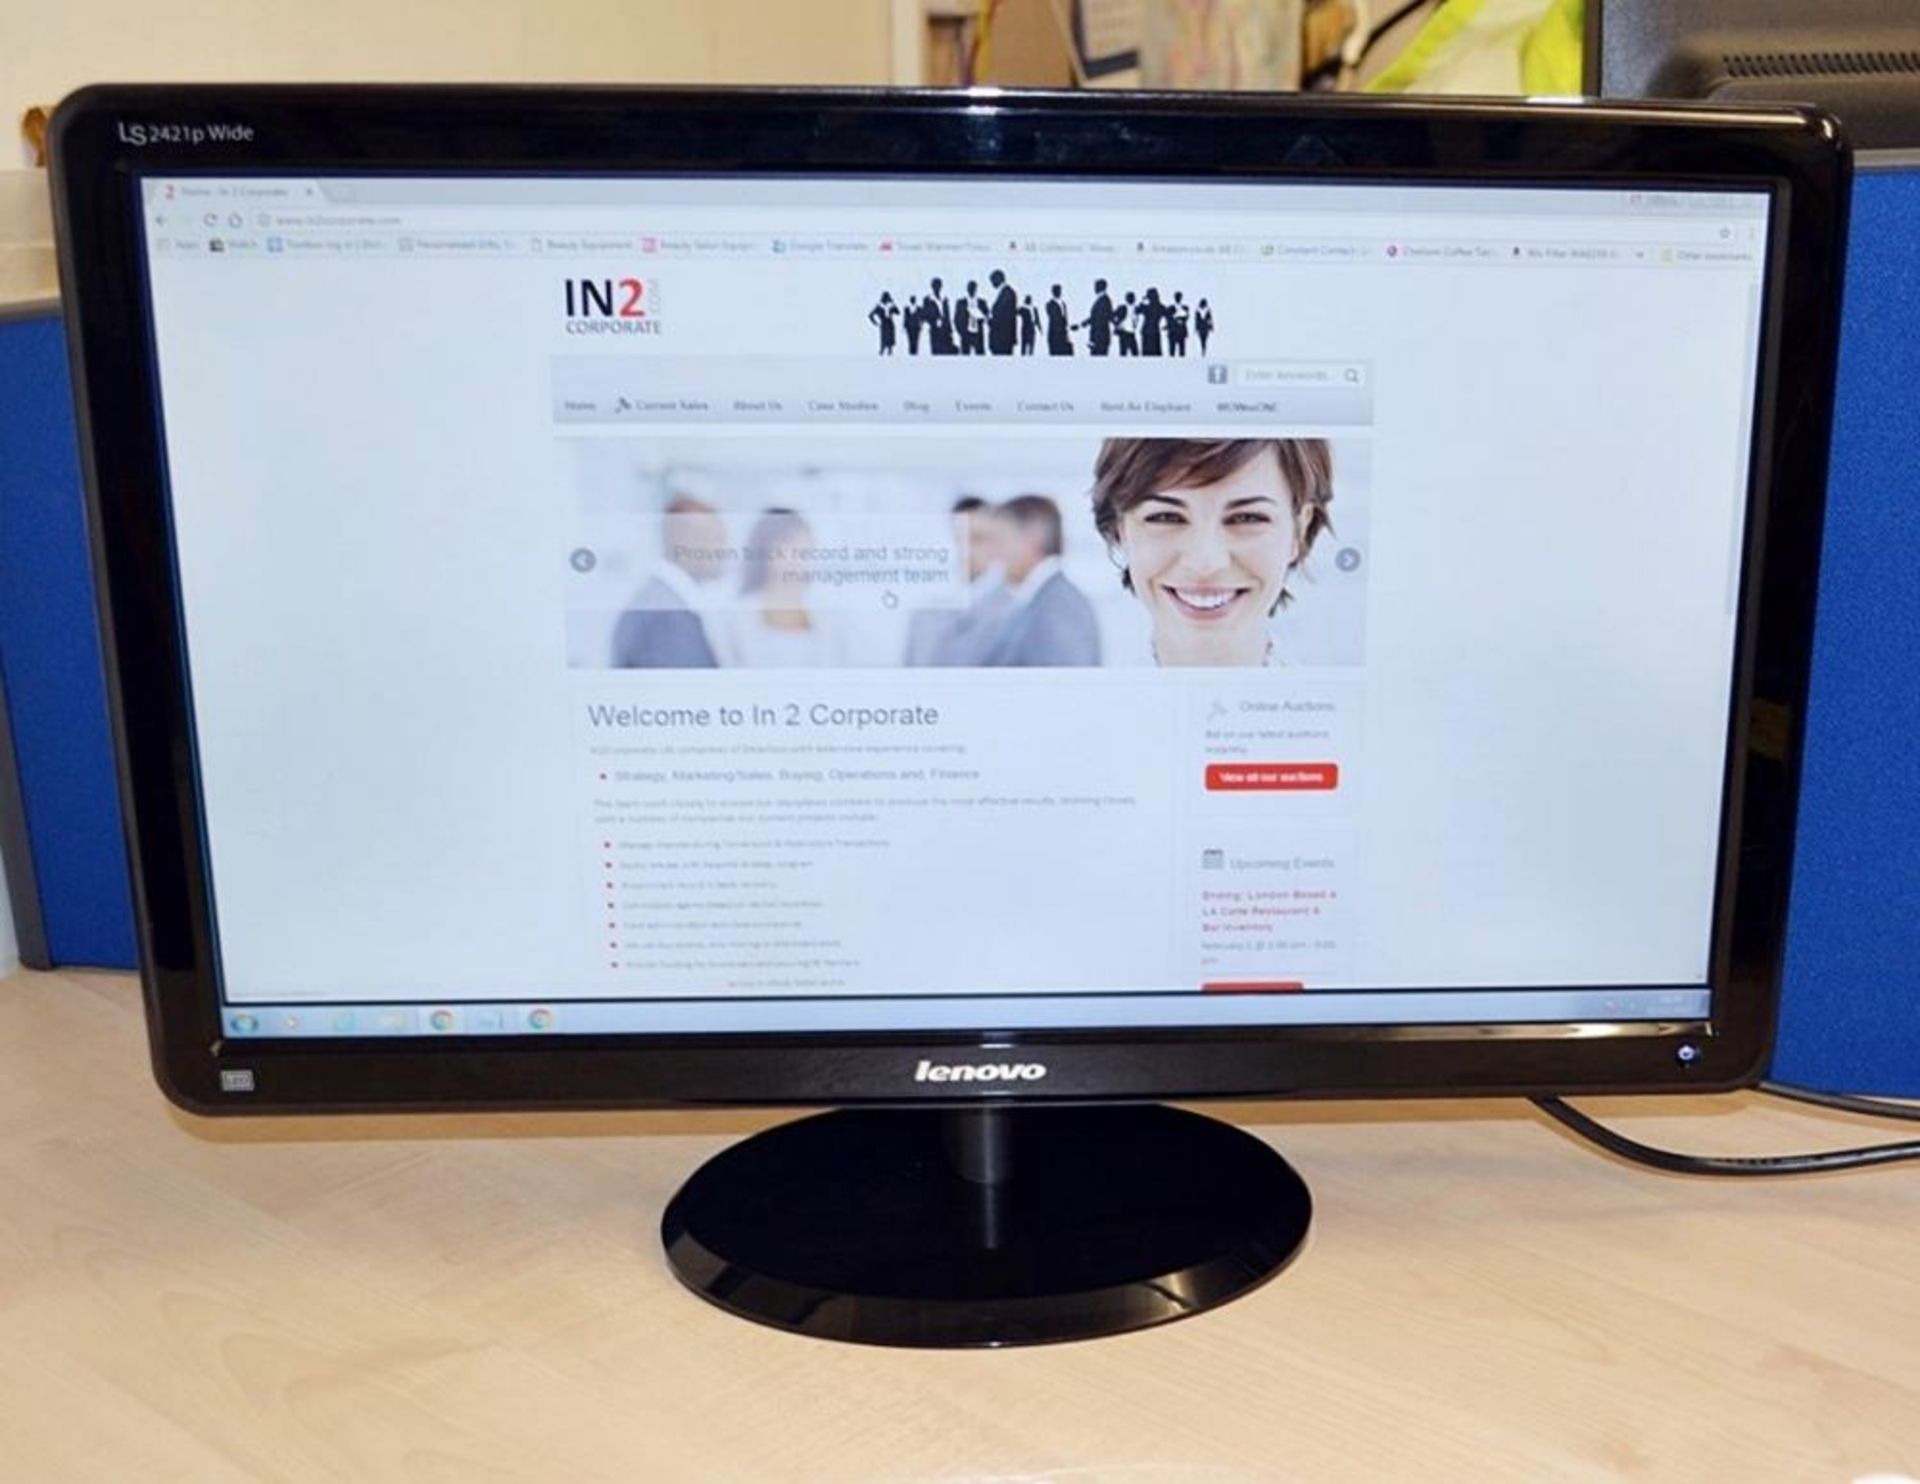 1 x Lenovo LS2421p Wide 23.6" Full HD LED TFT Monitor (Model: 4015-LS1) - Recently Taken From A - Image 7 of 14